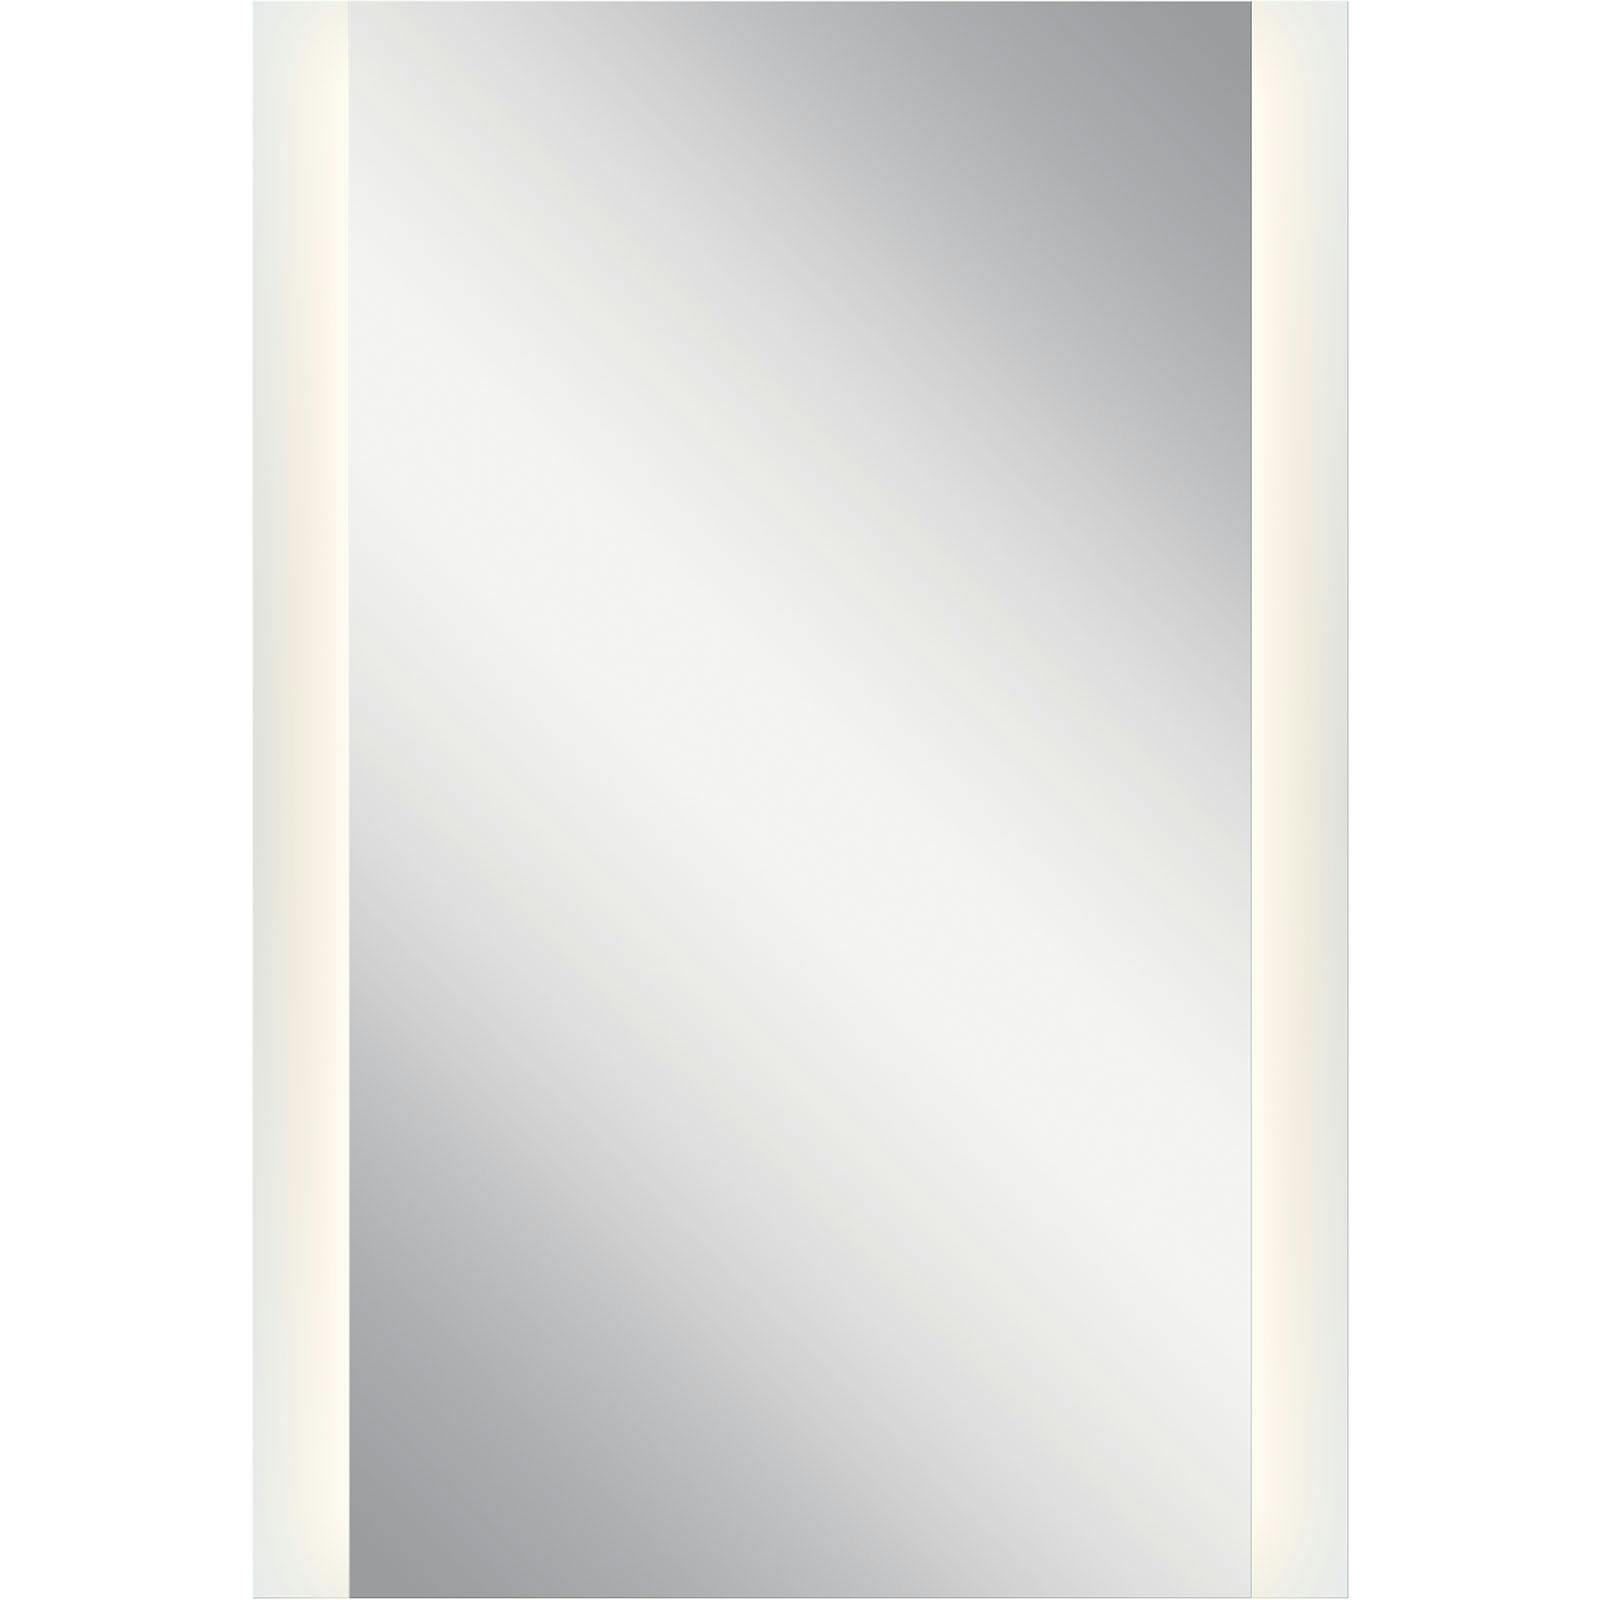 39" x 27" Rectangular LED Backlit Mirror hung vertically on a white background